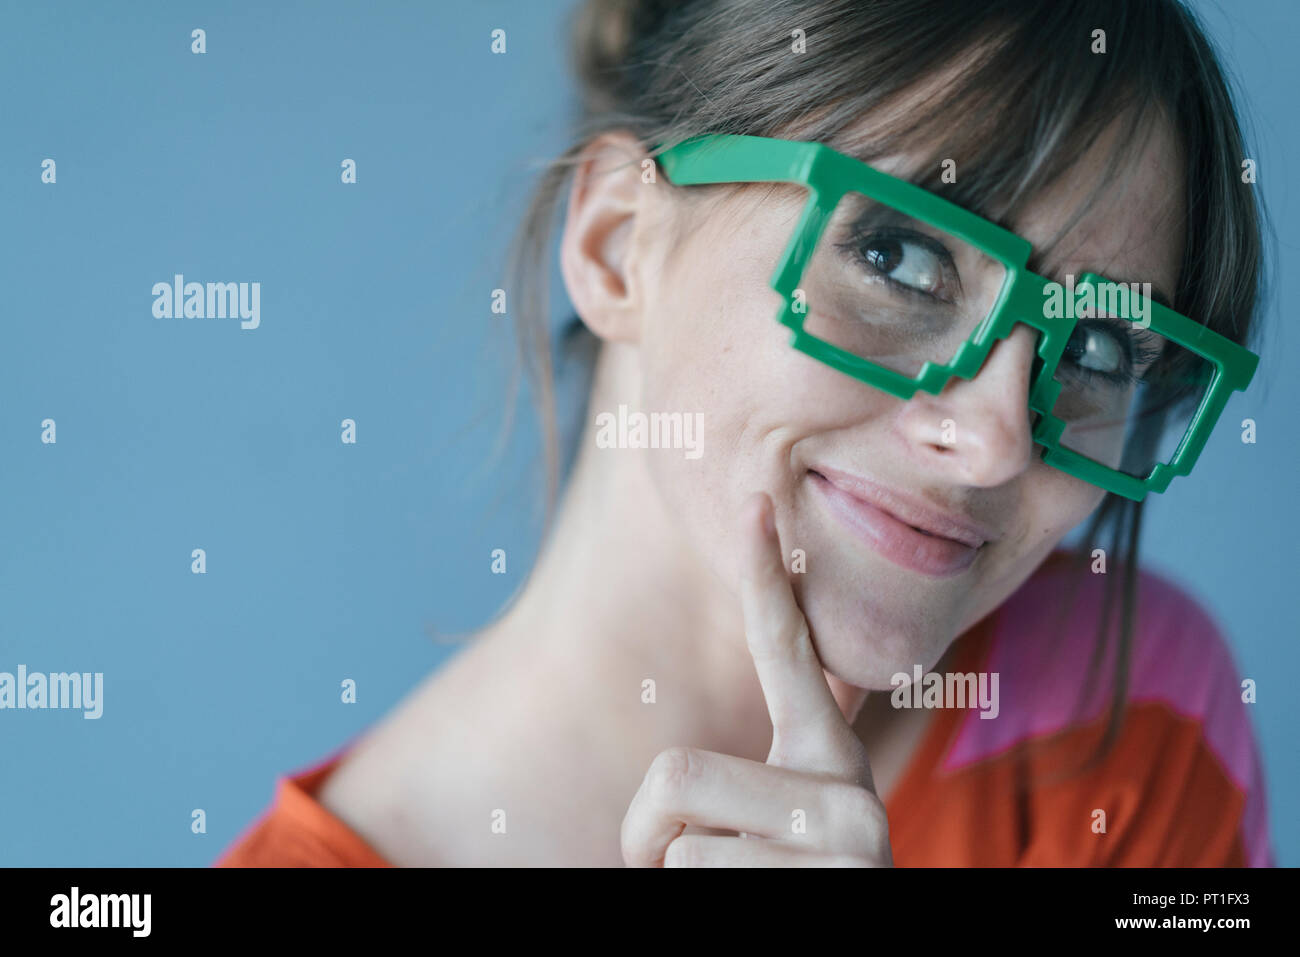 Young woman wearing pixel glasses, smiling Stock Photo